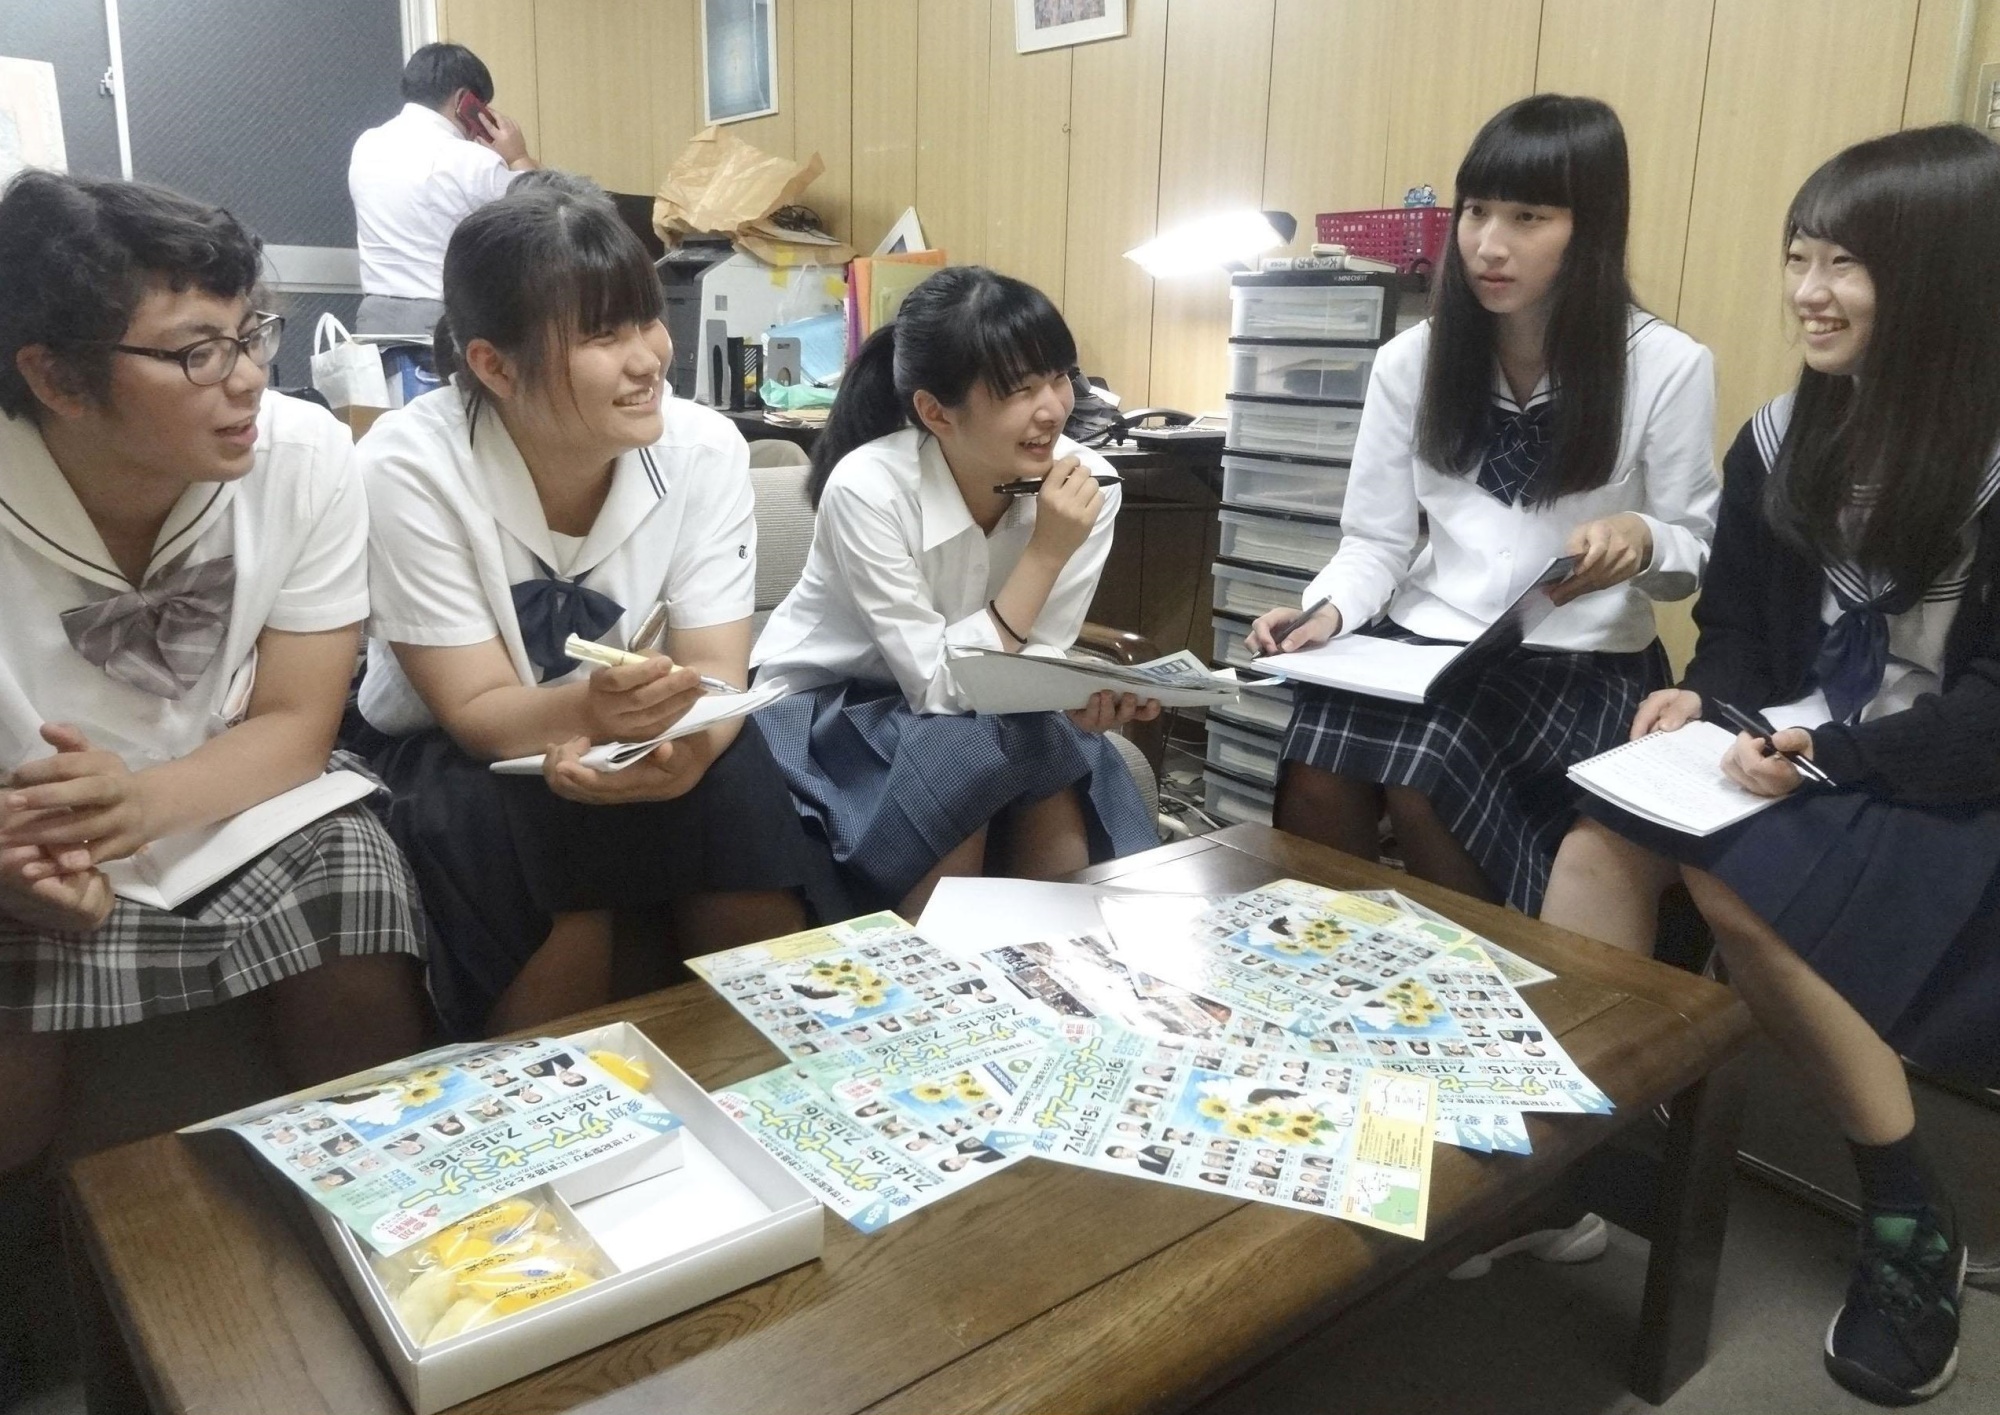 High school students of Aichi Prefefcture gather in Nagoya on June 15 to discuss a plan to hold a mock referendum on constitutional revision and call on high school students nationwide to participate. | KYODO